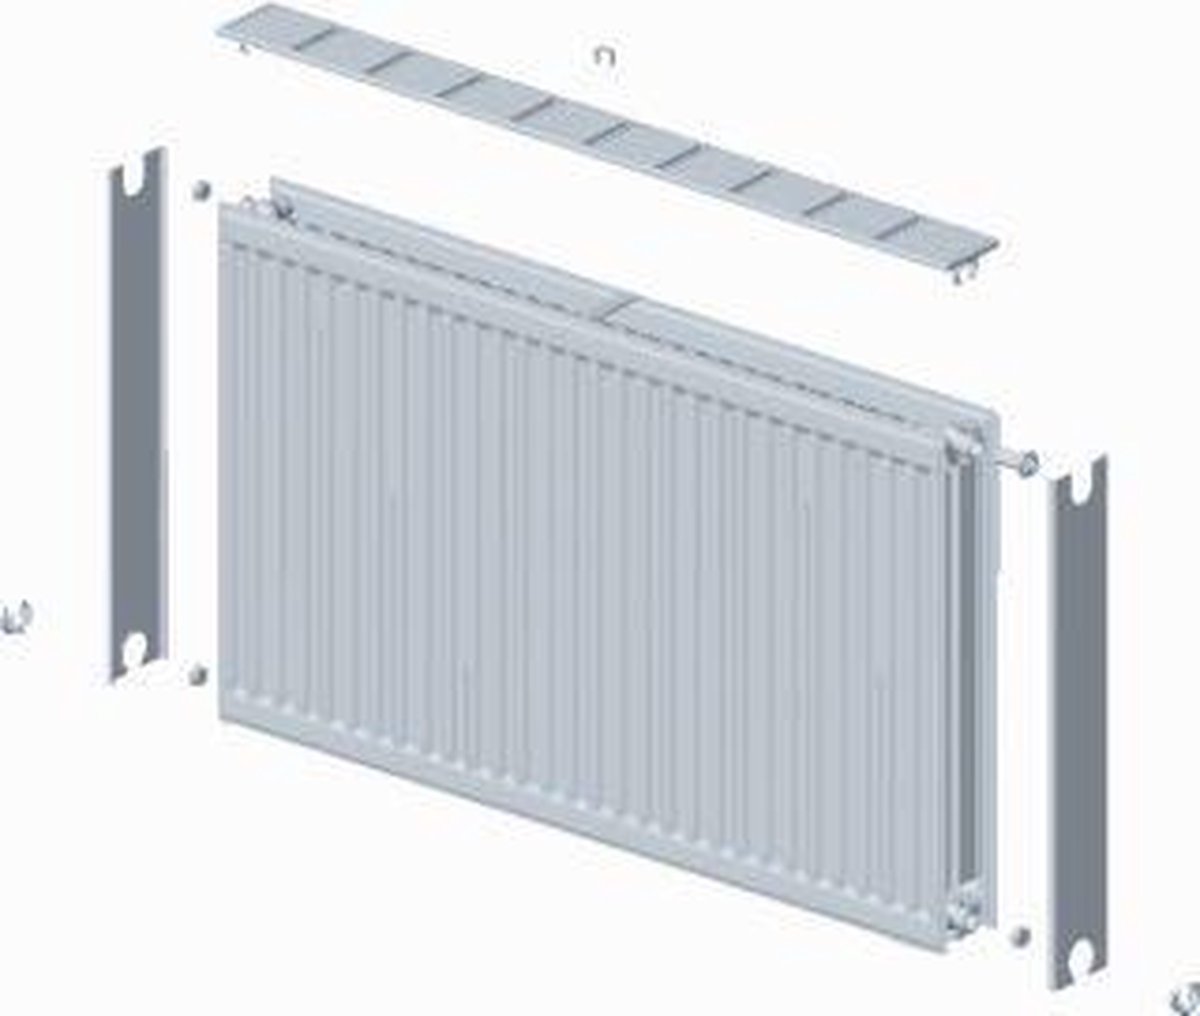 Stelrad paneelradiator Novello, staal, wit, (hxlxd) 500x900x100mm, 22